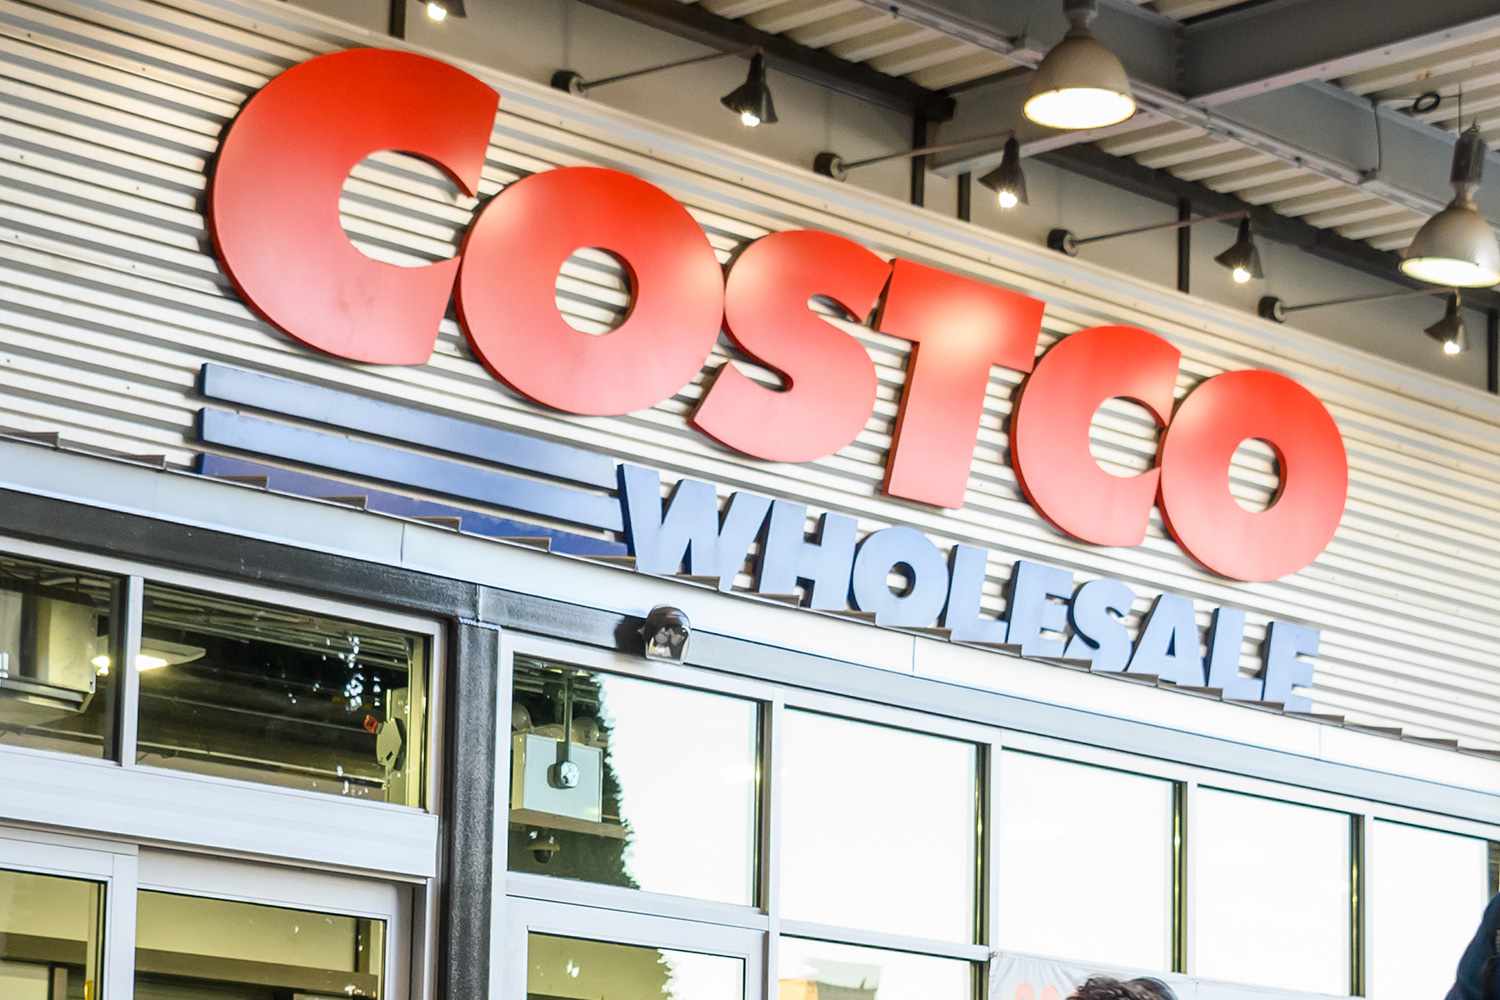 Costco Wholesale in East Harlem on November 24, 2020 a New York City